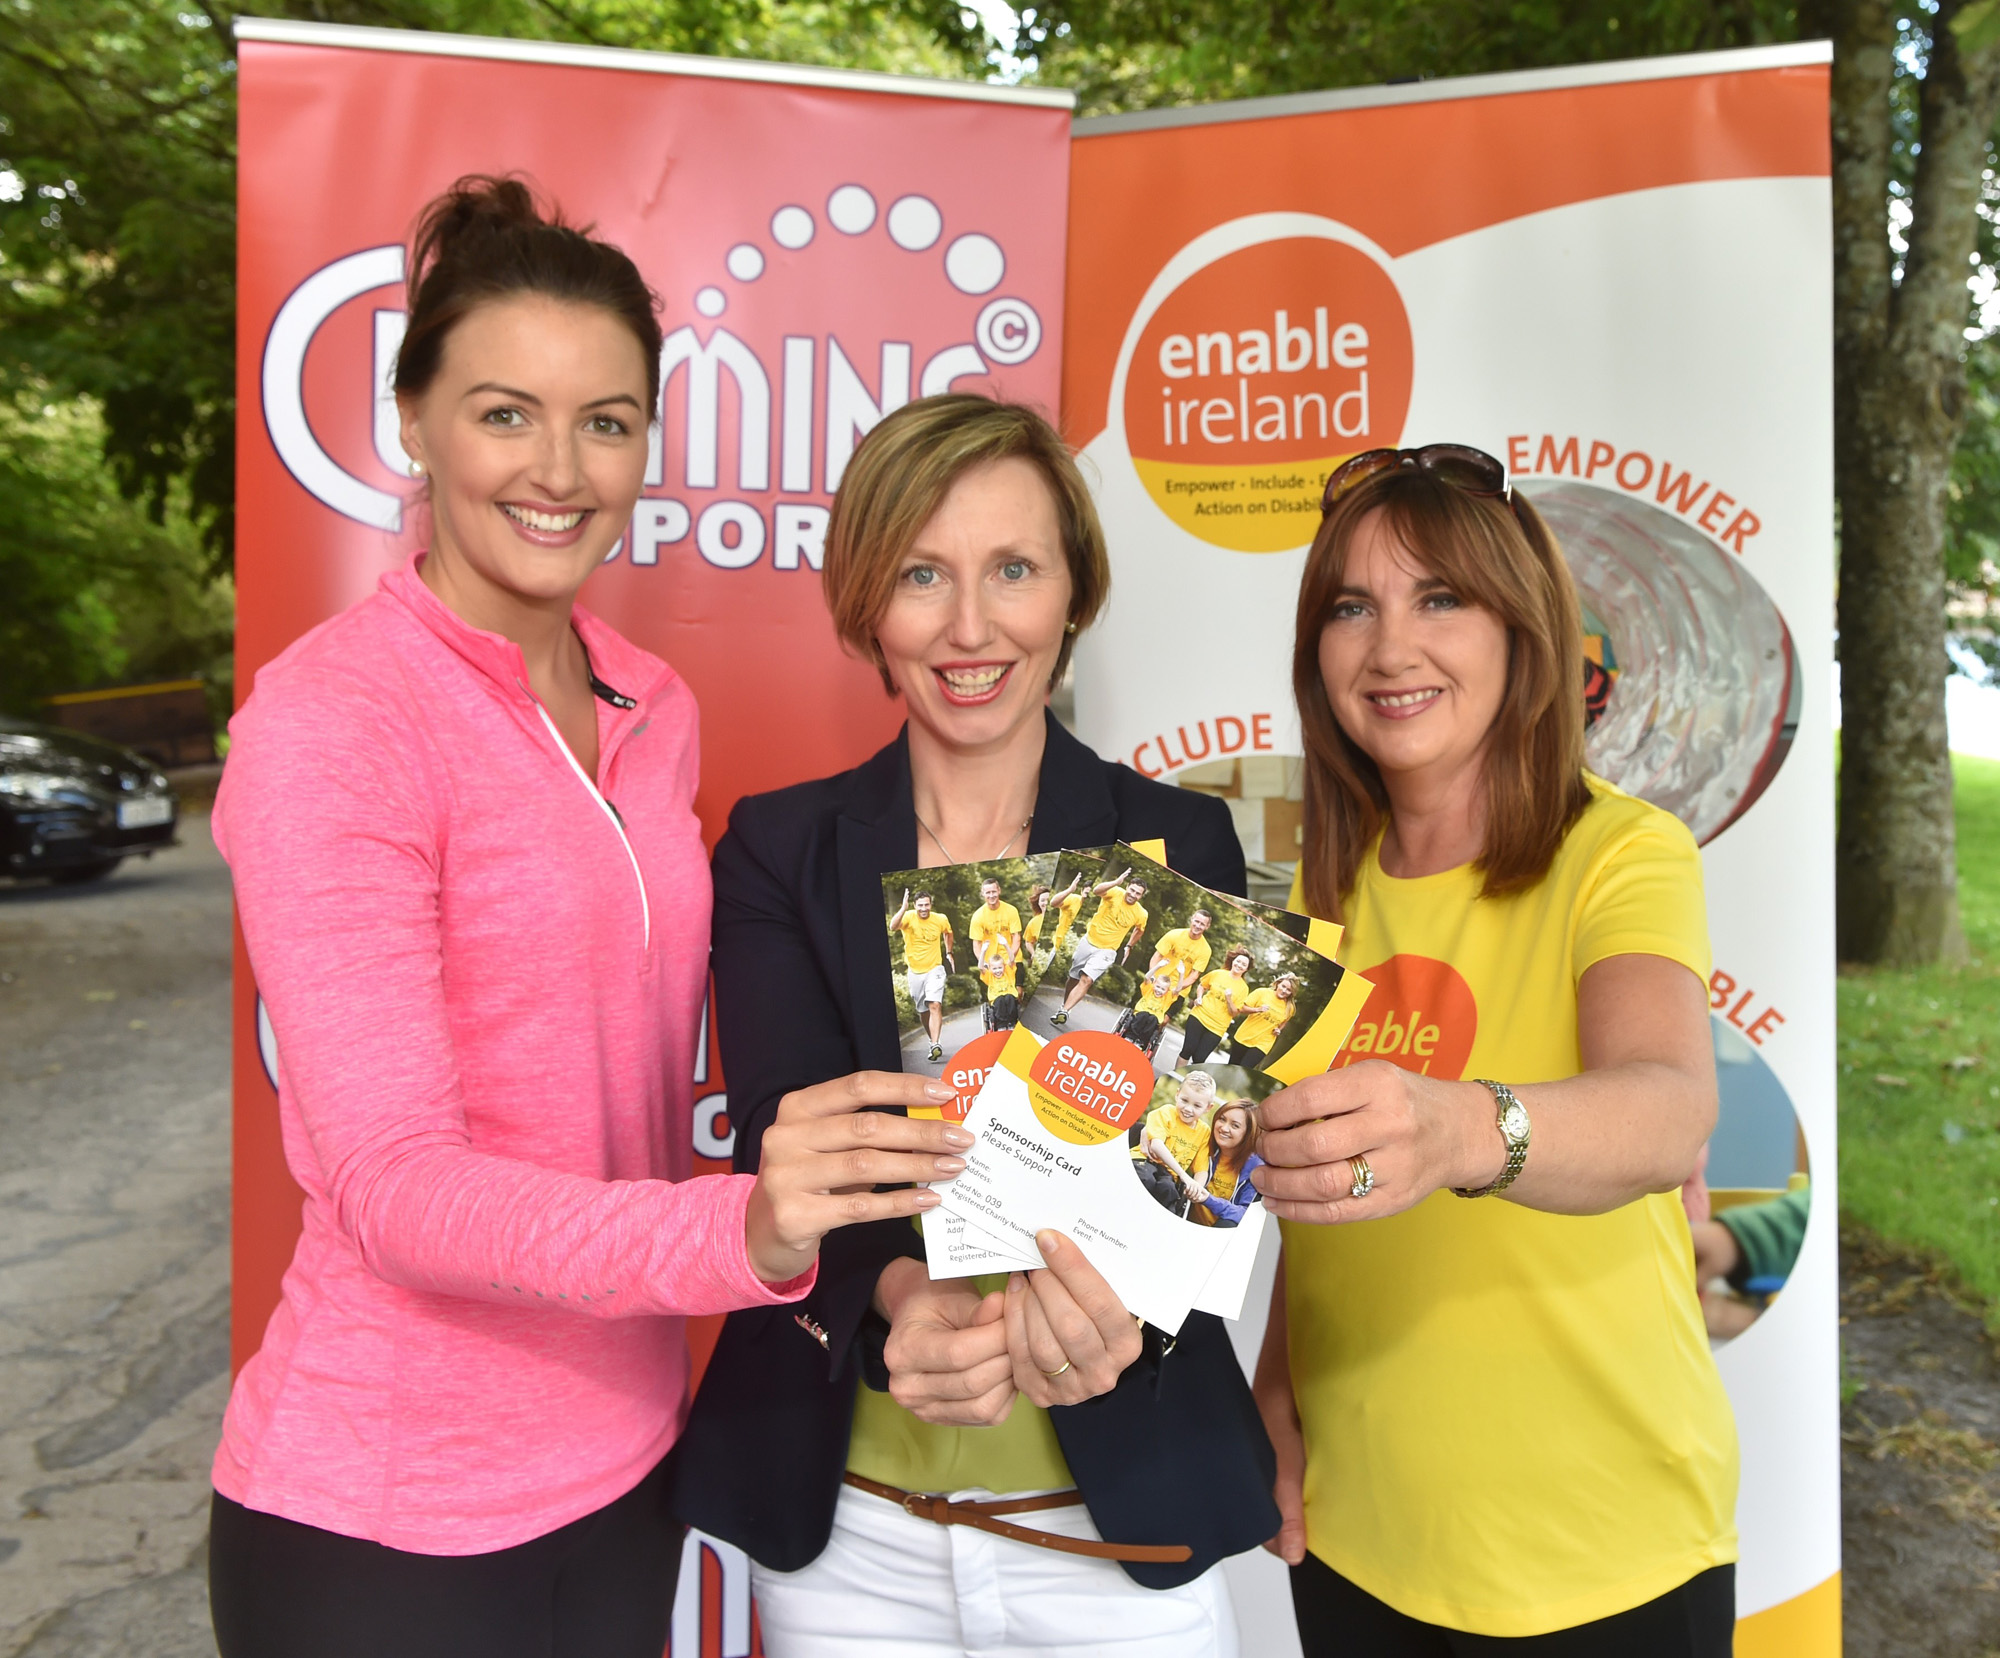 Mary-Claire Cummins, Cummins Sports, Olive Loughnane, World Champion,  and Maria Desmond, Enable Ireland